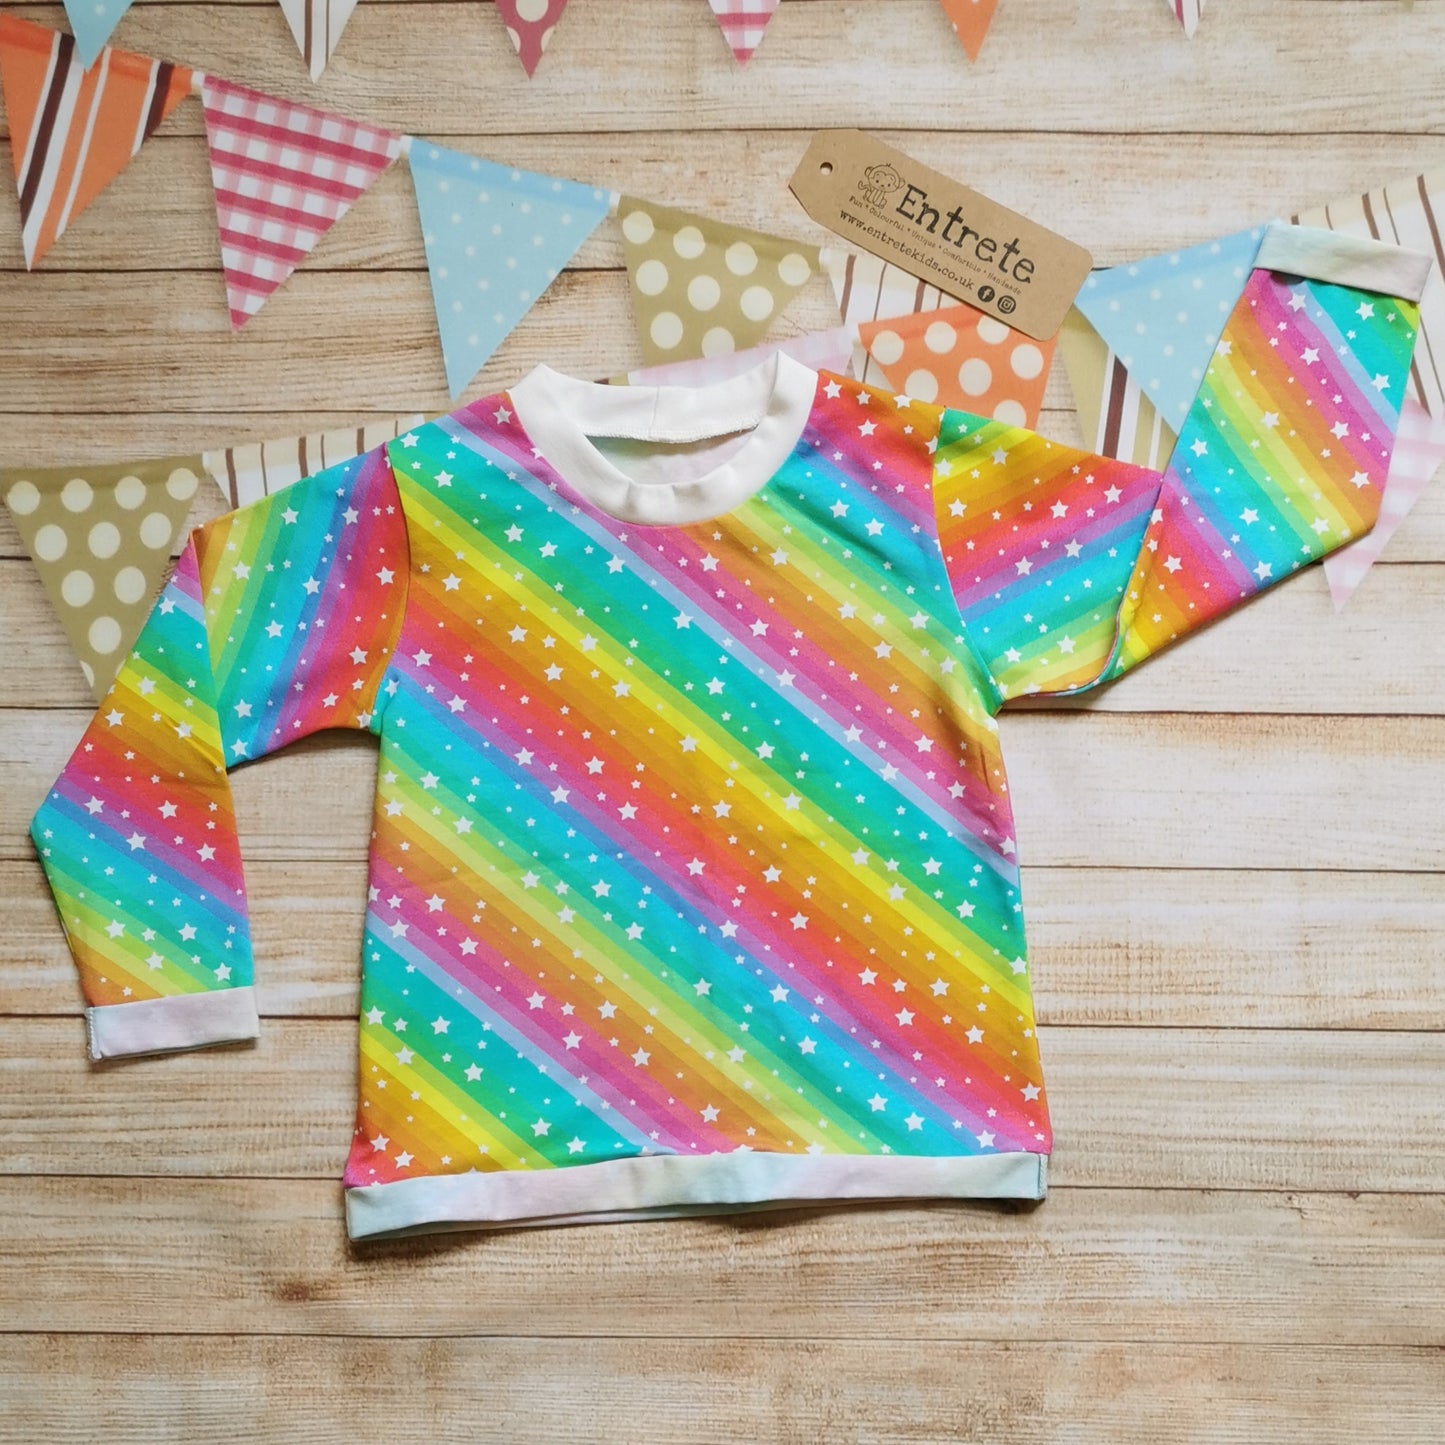 Long sleeve Tee with rolled cuffs and waist. Handmade in the vivid bright rainbow stars cotton jersey with a cream ribbing neck.